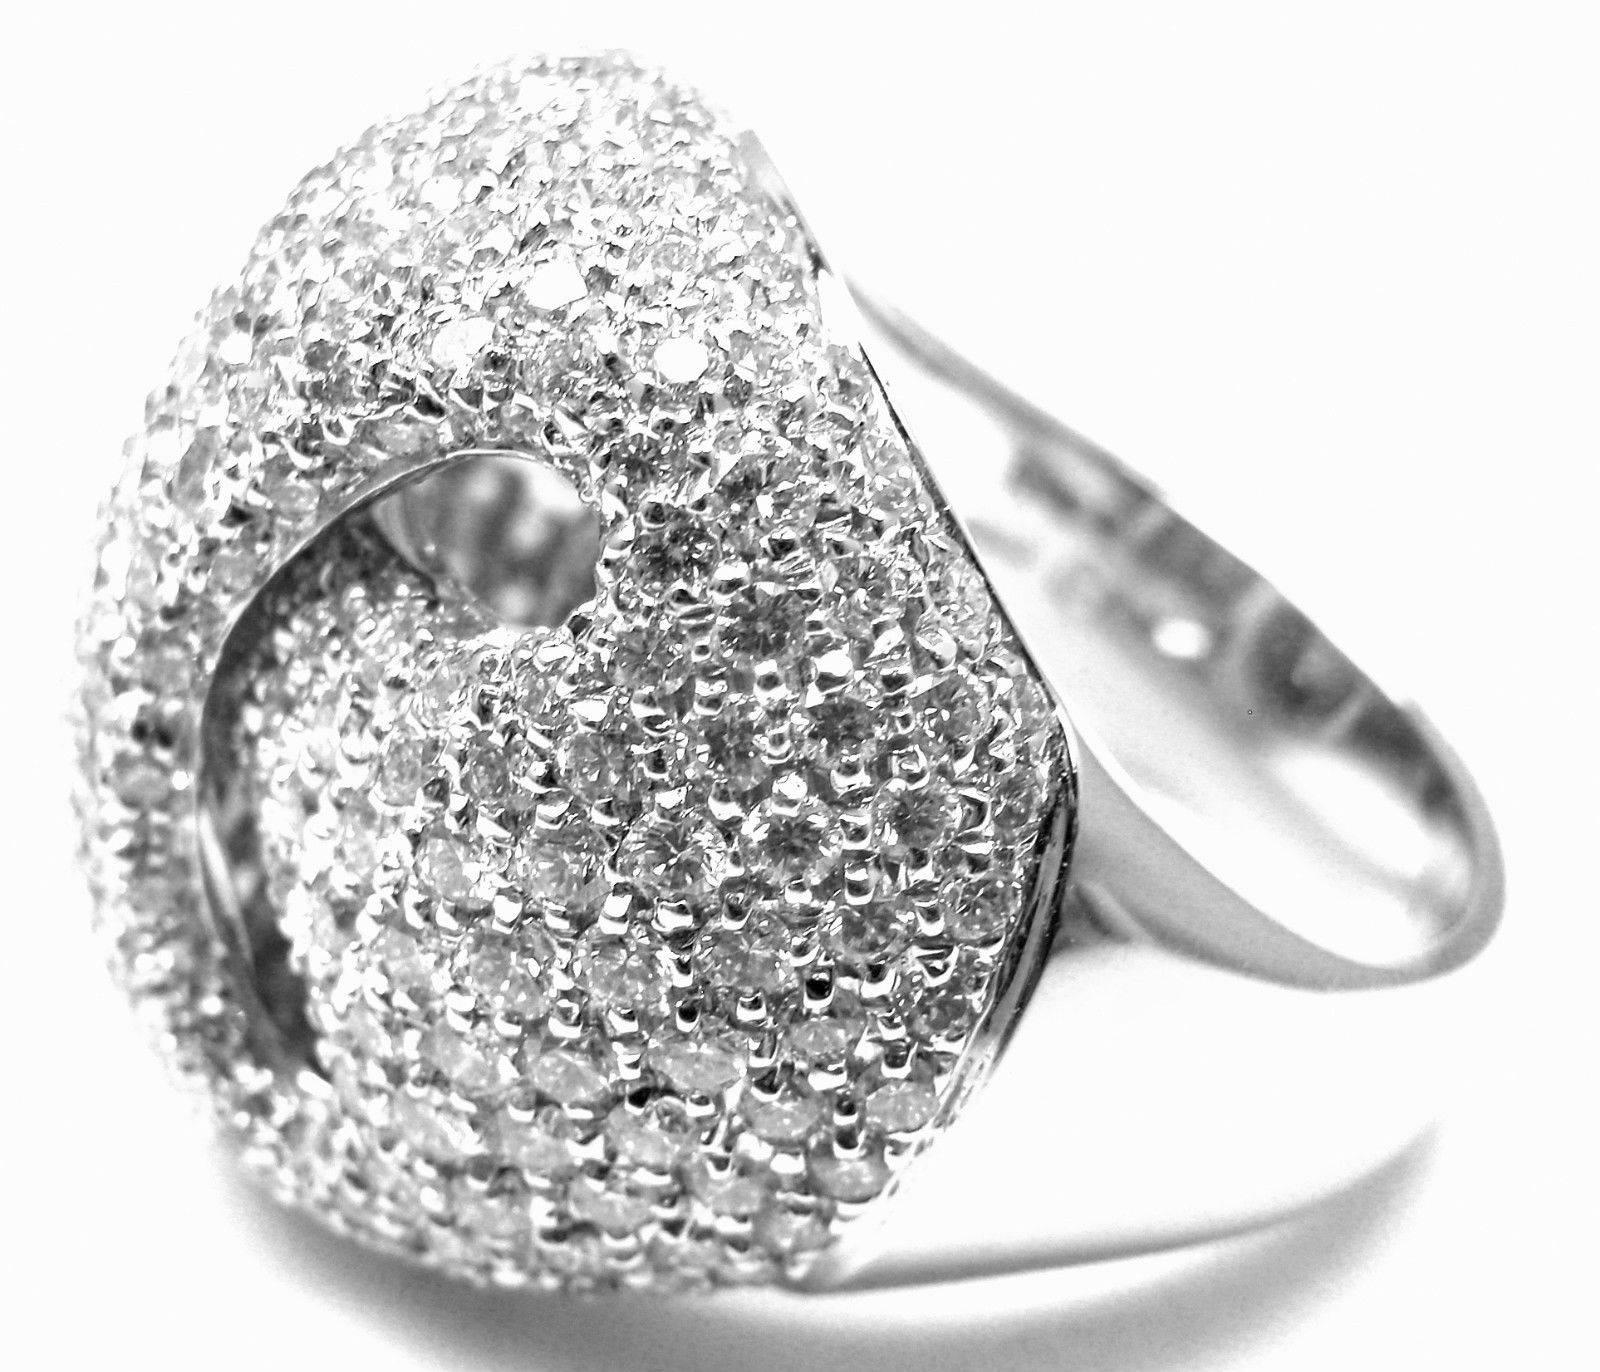 18k White Gold Diamond Large Ring by Damiani.
With round brilliant cut diamonds total weight approx 3.21ct VS2 clarity, G color
This ring comes with Box, Certificate.

Details:
Size:  7
Width: 21mm
Weight:  17.9 grams
Stamped Hallmarks: